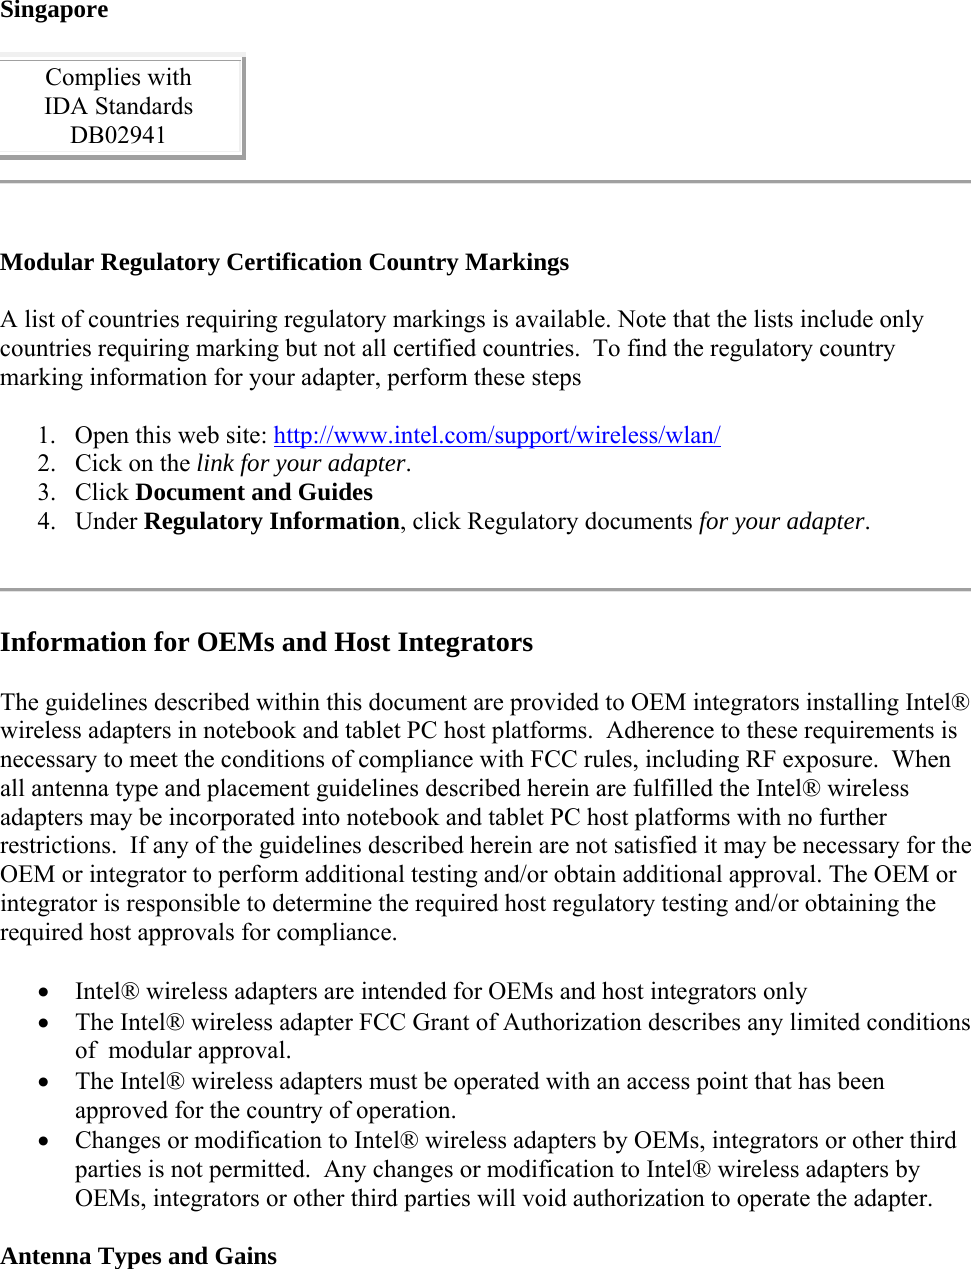 Singapore Complies with  IDA Standards  DB02941   Modular Regulatory Certification Country Markings A list of countries requiring regulatory markings is available. Note that the lists include only countries requiring marking but not all certified countries.  To find the regulatory country marking information for your adapter, perform these steps 1. Open this web site: http://www.intel.com/support/wireless/wlan/  2. Cick on the link for your adapter.  3. Click Document and Guides  4. Under Regulatory Information, click Regulatory documents for your adapter.   Information for OEMs and Host Integrators The guidelines described within this document are provided to OEM integrators installing Intel® wireless adapters in notebook and tablet PC host platforms.  Adherence to these requirements is necessary to meet the conditions of compliance with FCC rules, including RF exposure.  When all antenna type and placement guidelines described herein are fulfilled the Intel® wireless adapters may be incorporated into notebook and tablet PC host platforms with no further restrictions.  If any of the guidelines described herein are not satisfied it may be necessary for the OEM or integrator to perform additional testing and/or obtain additional approval. The OEM or integrator is responsible to determine the required host regulatory testing and/or obtaining the required host approvals for compliance.   Intel® wireless adapters are intended for OEMs and host integrators only  The Intel® wireless adapter FCC Grant of Authorization describes any limited conditions of  modular approval.  The Intel® wireless adapters must be operated with an access point that has been approved for the country of operation.  Changes or modification to Intel® wireless adapters by OEMs, integrators or other third parties is not permitted.  Any changes or modification to Intel® wireless adapters by OEMs, integrators or other third parties will void authorization to operate the adapter. Antenna Types and Gains 